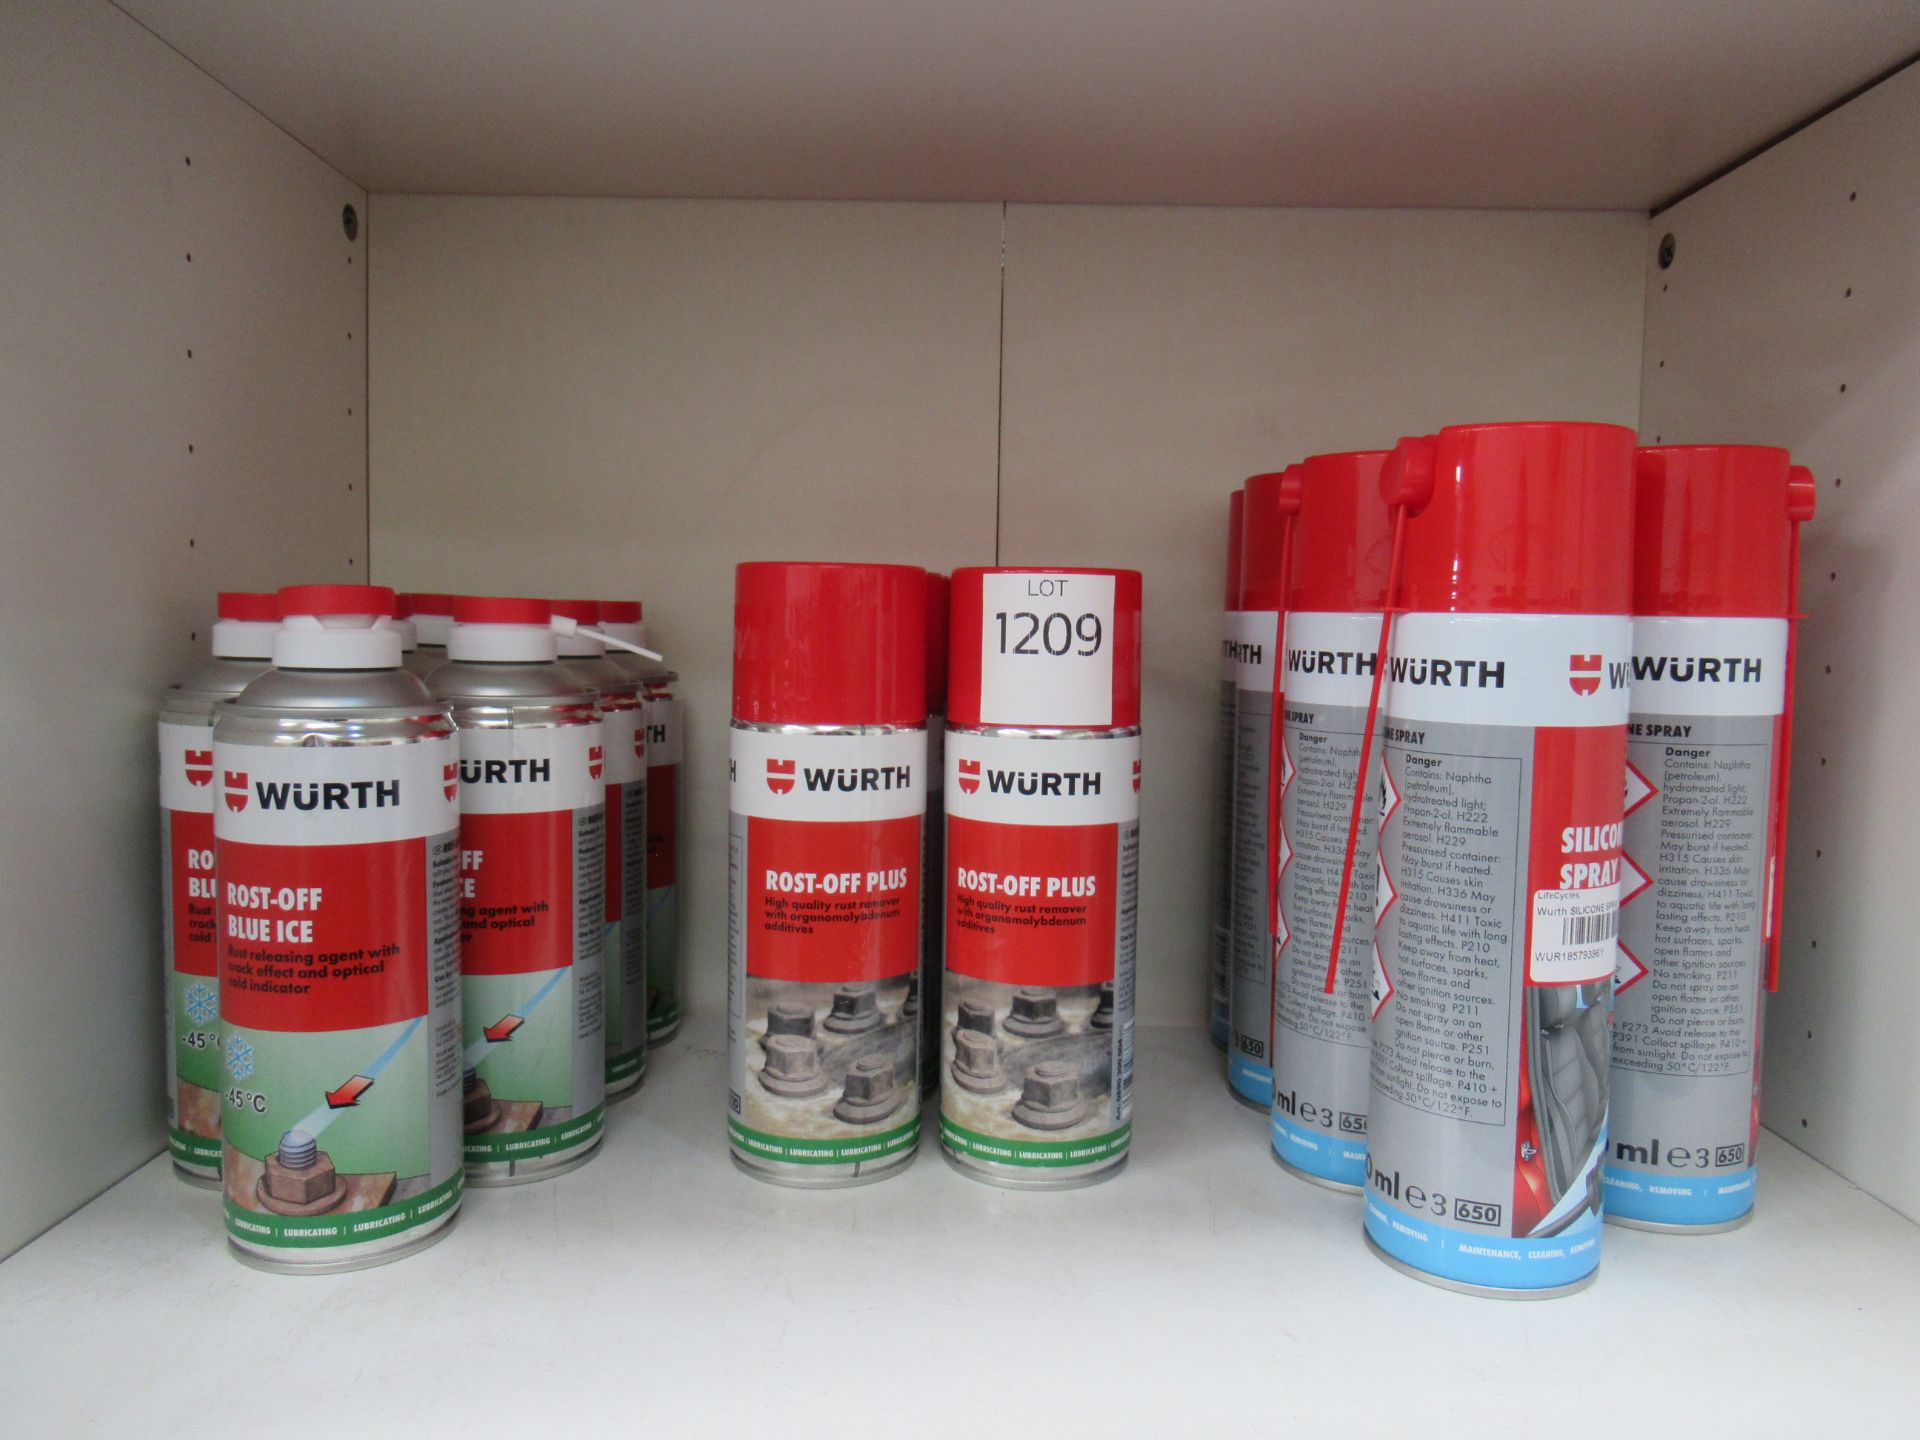 Shelf of Würth products to include 7 x Rost-Off Blue Ice 400ml (RRP£13.99 each); 6 x Rost-Off Plus 4